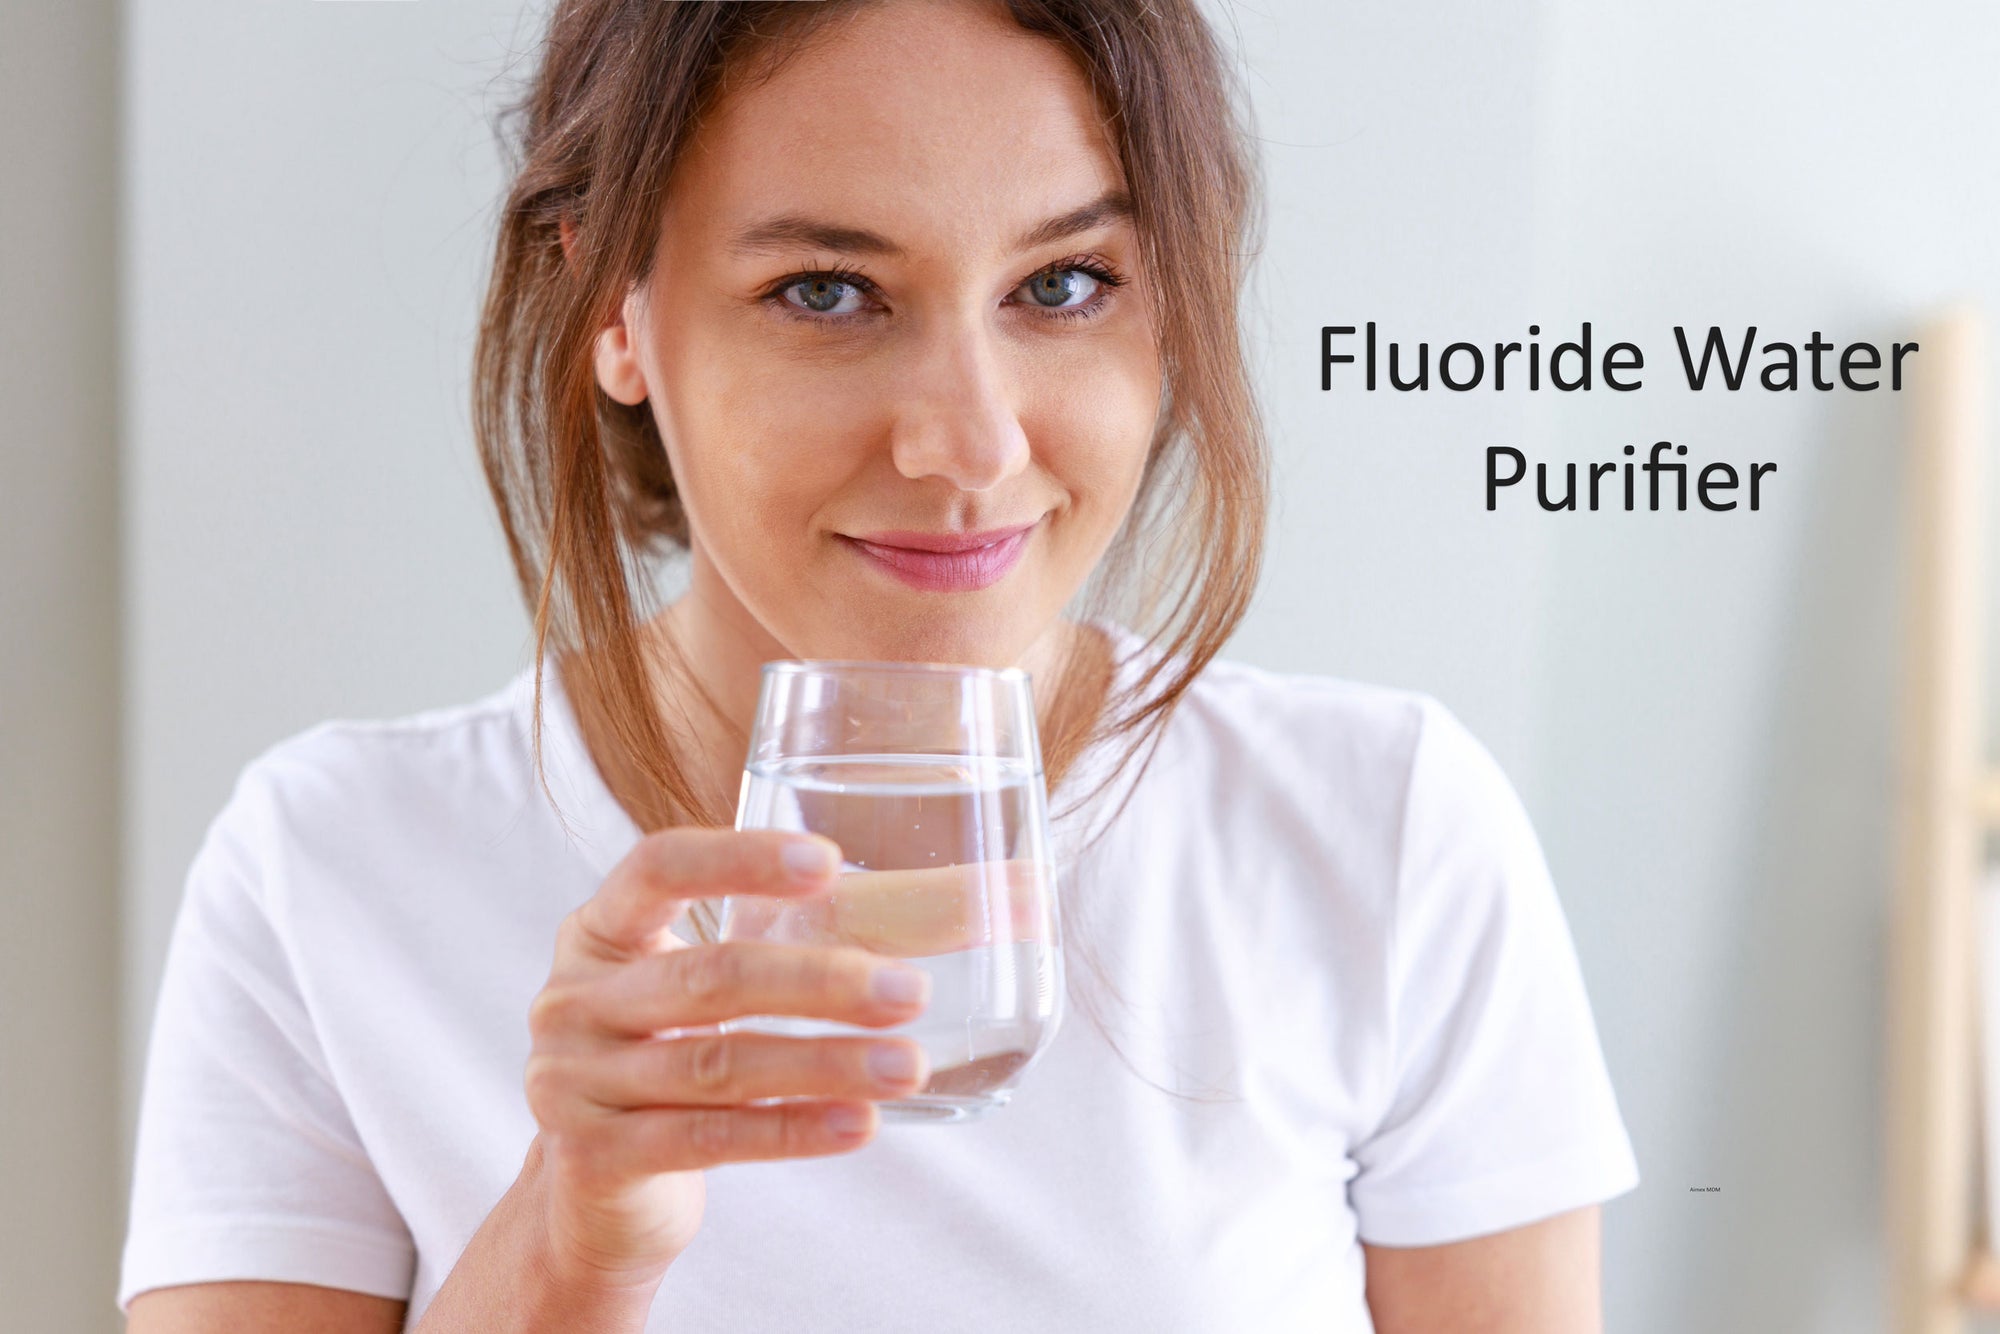 HOW TO INSTALL AND MAINTAIN YOUR 8 STAGE FLUORIDE WATER FILTER FOR LONGEVITY - STEP-BY-STEP GUIDE FOR AIMEX FLUORIDE FILTER